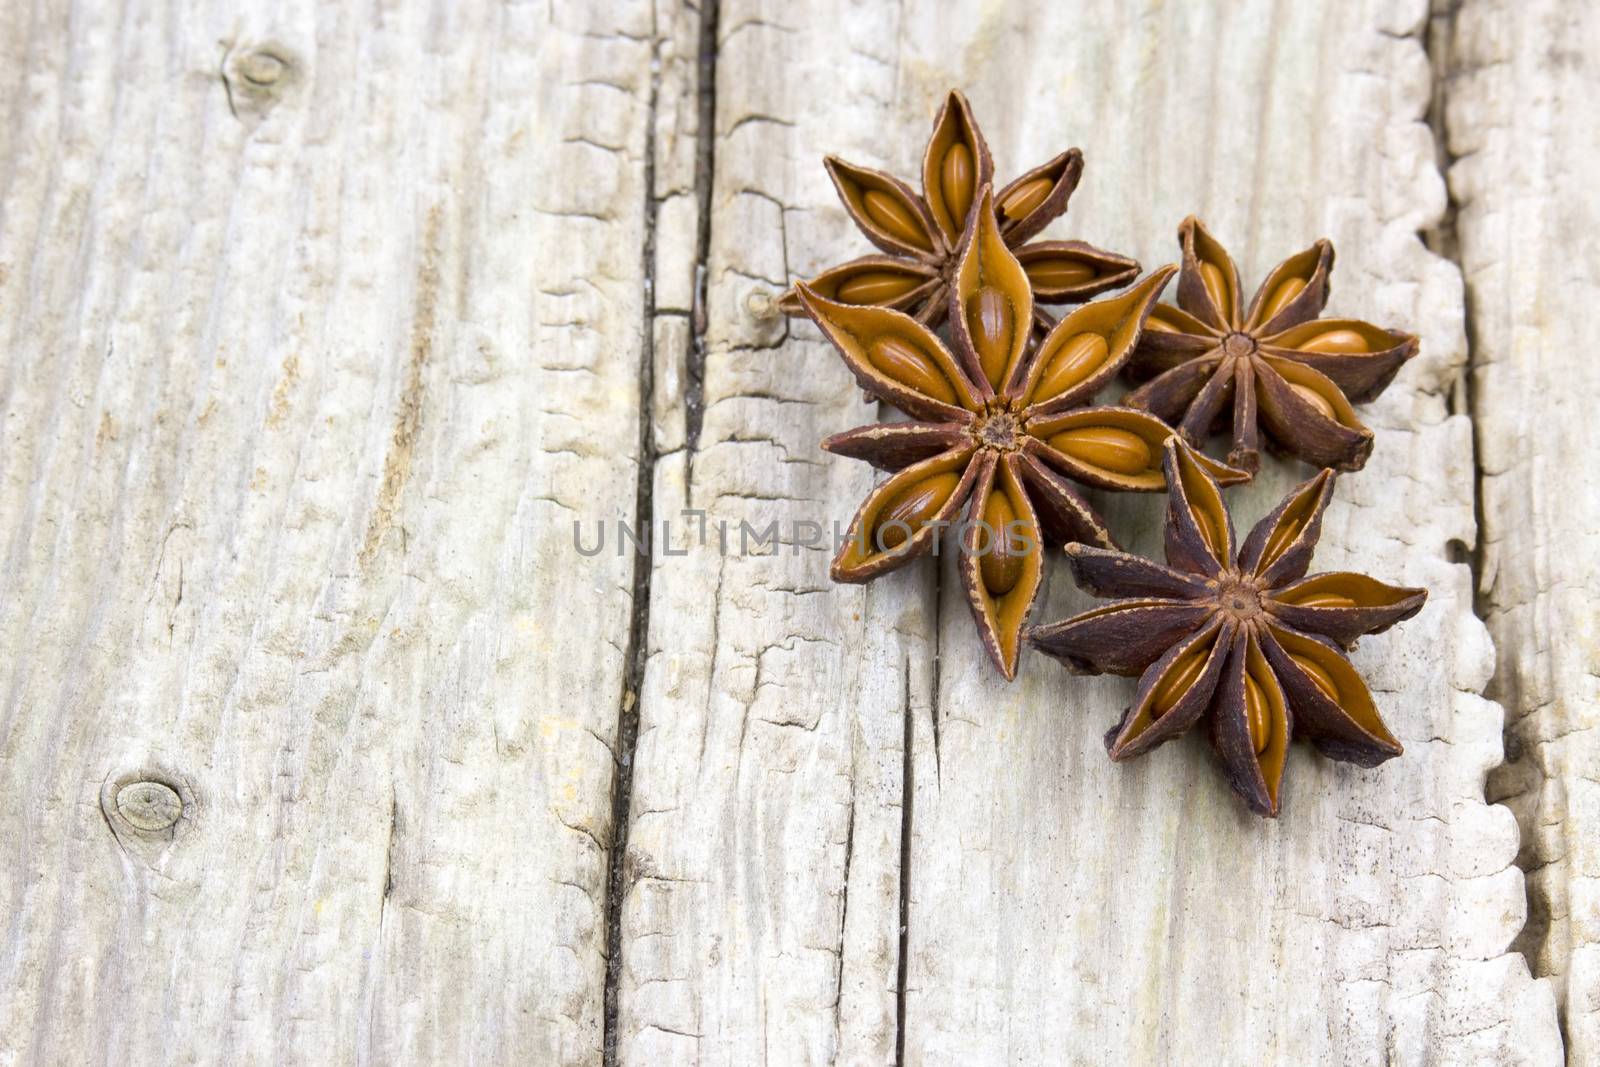 star anise on wooden background by miradrozdowski